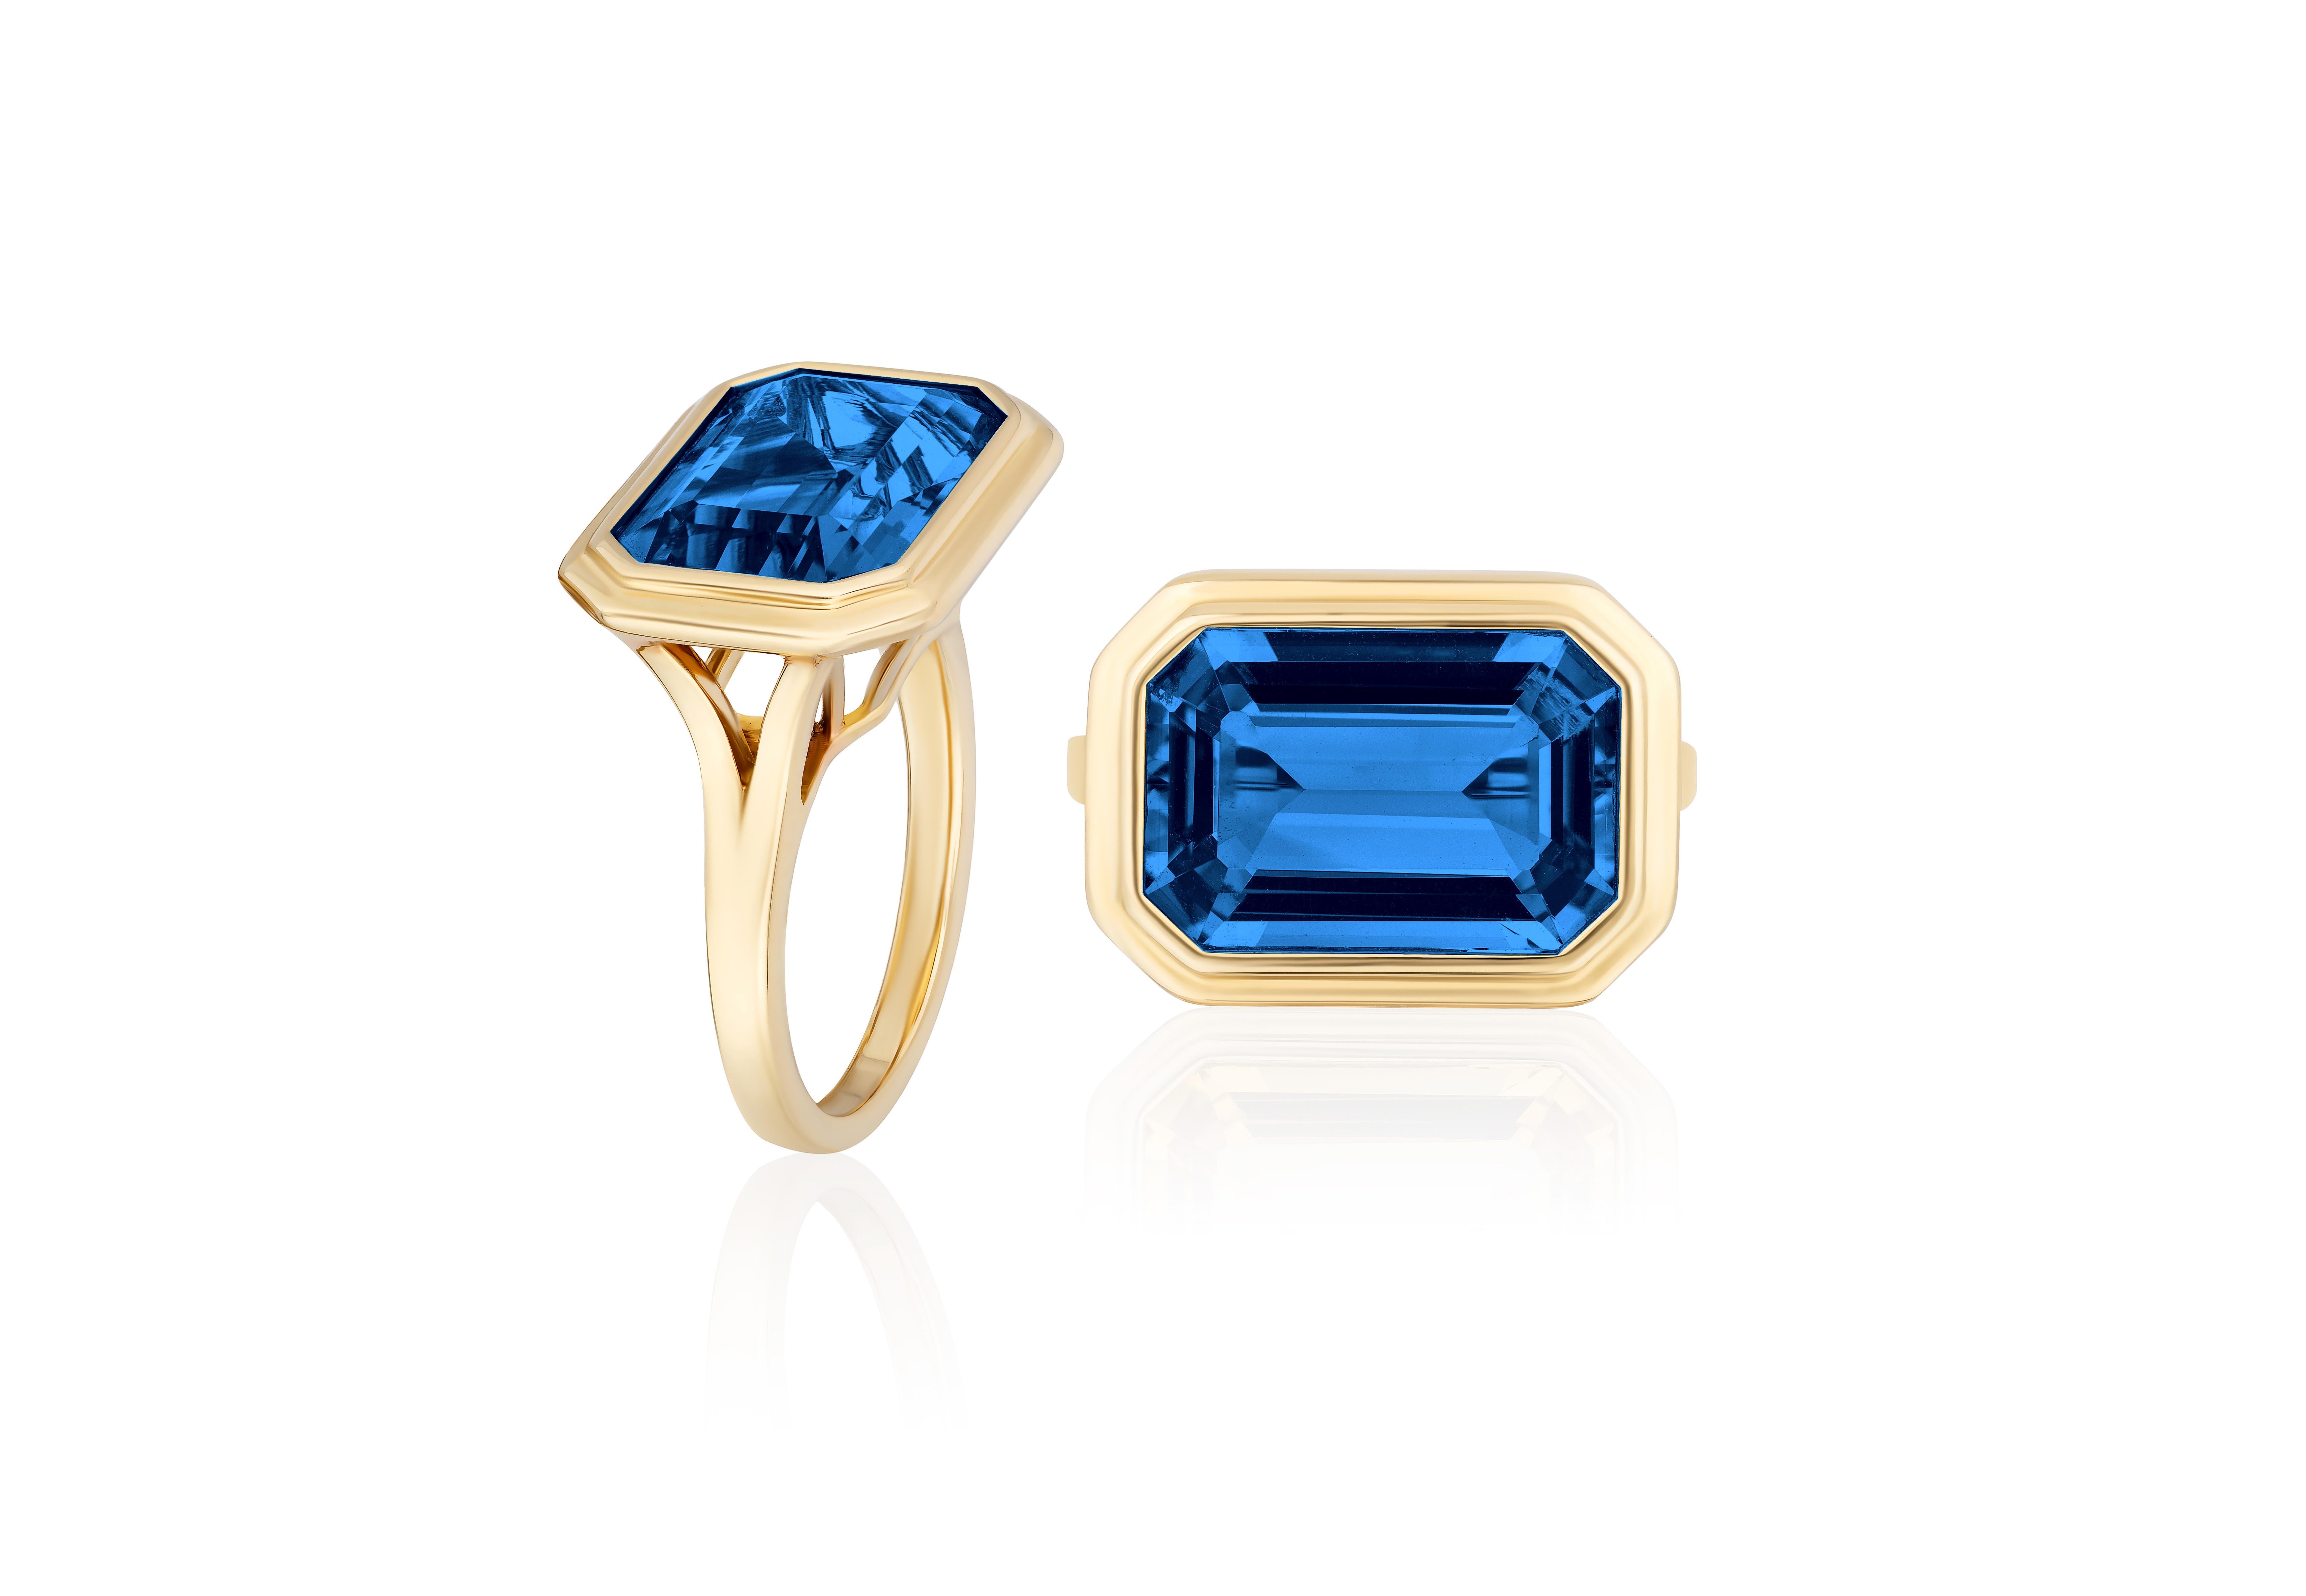 The East-West London Blue Topaz Emerald Cut Bezel Set Ring is an elegant piece of jewelry from the 'Manhattan' Collection. The ring is crafted from 18K yellow gold and features a beautiful London blue topaz in an emerald cut, set horizontally in a